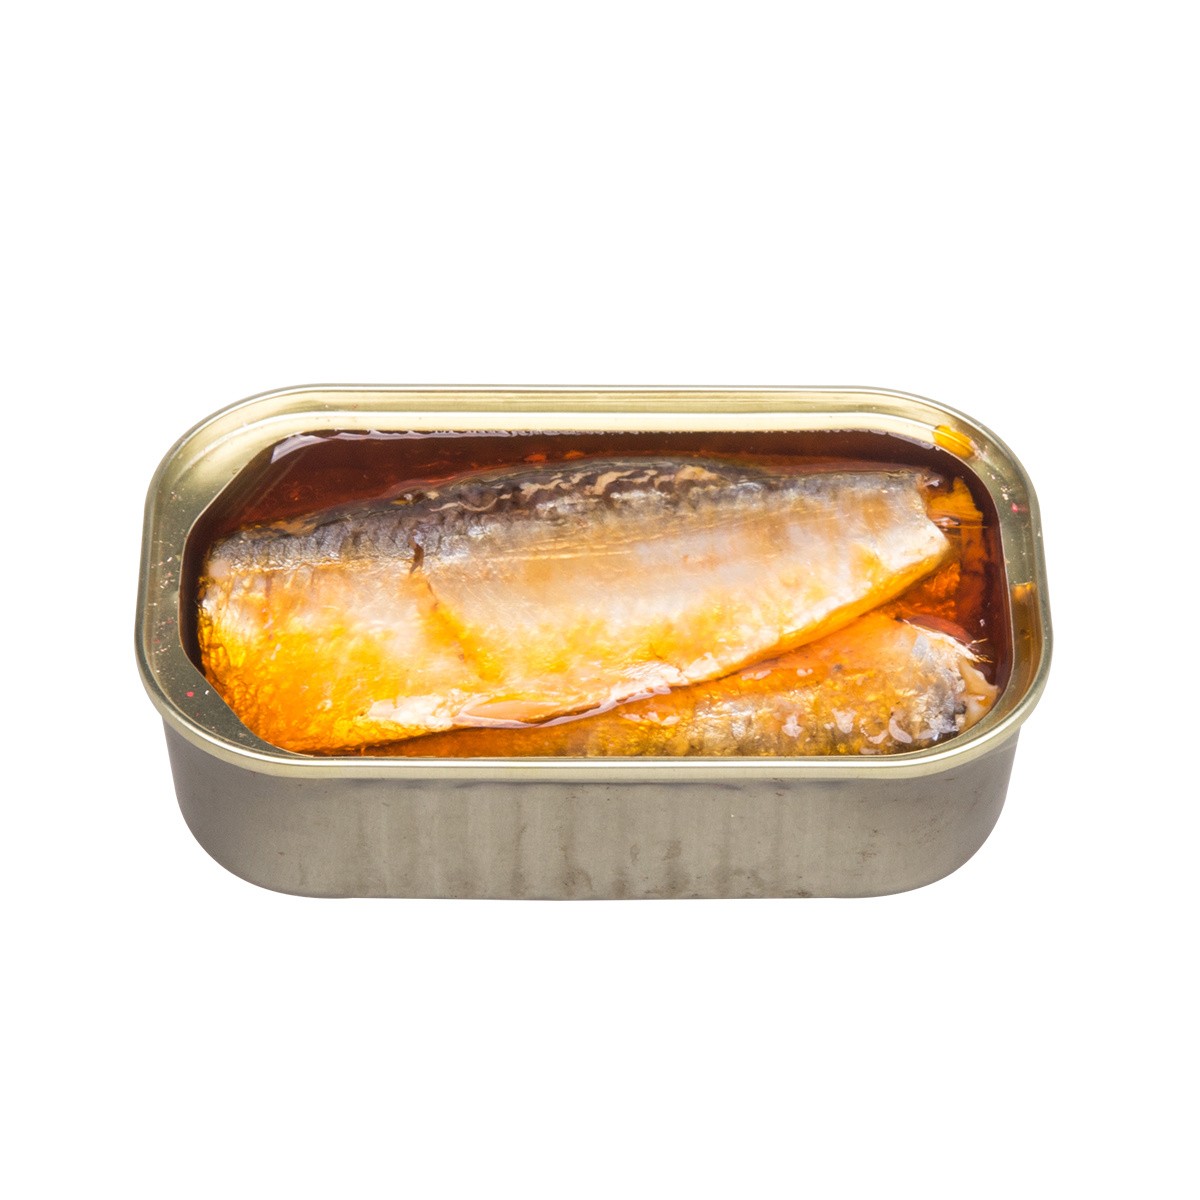 Canned Sardine in Tomato Sauce/Oil/Brine with Factory Price